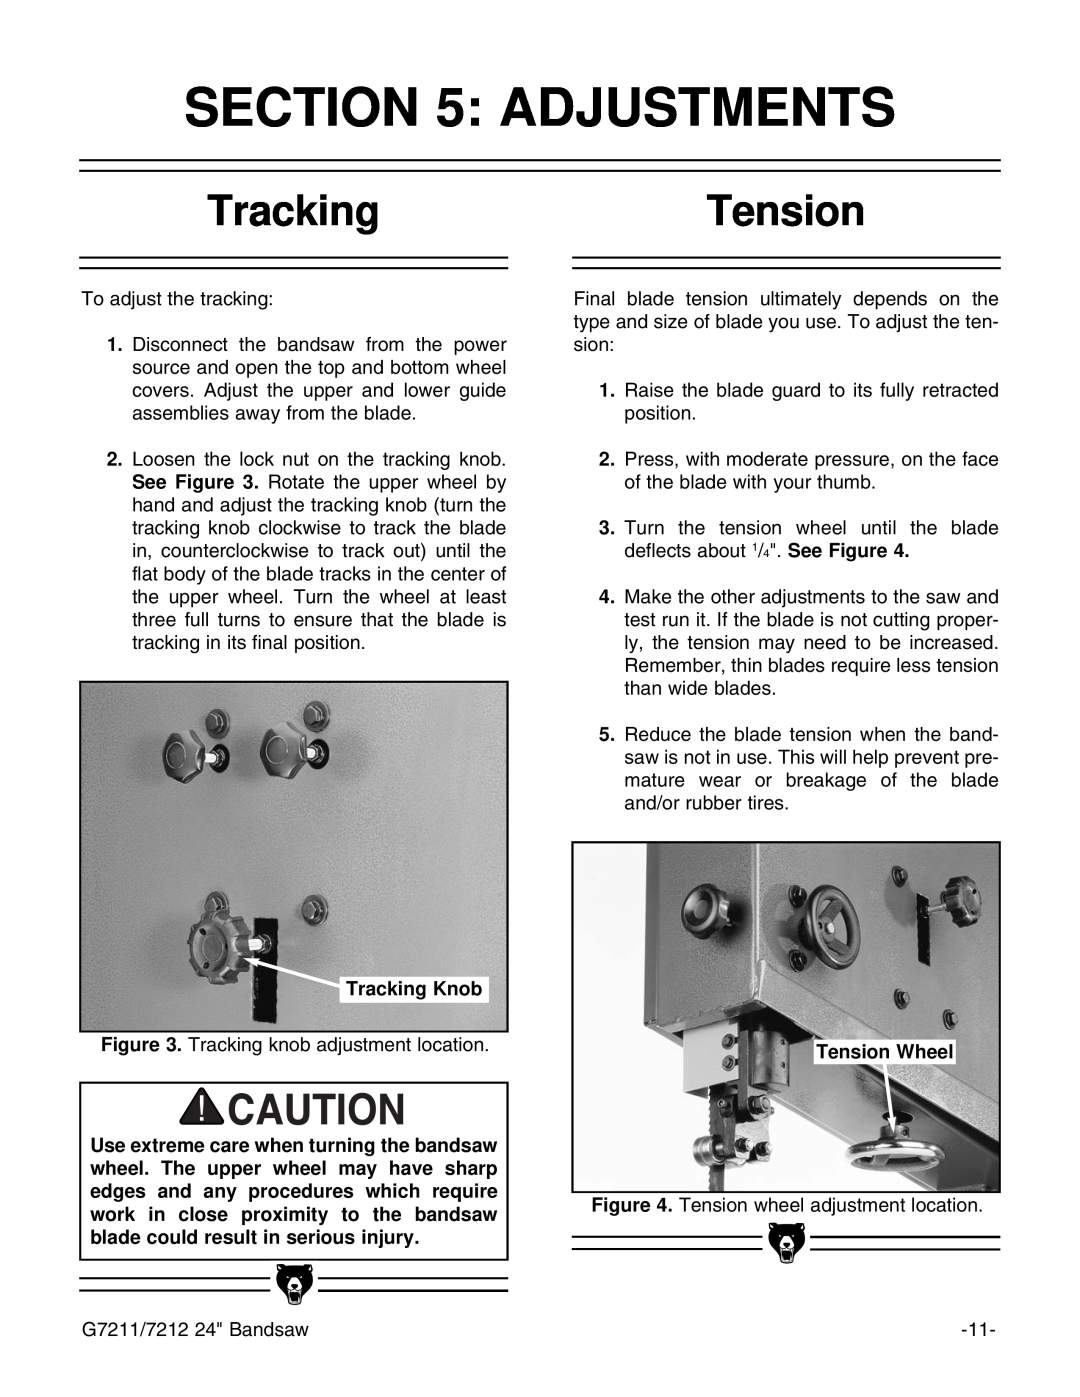 Grizzly G7211, G7212 instruction manual Adjustments, TrackingTension 